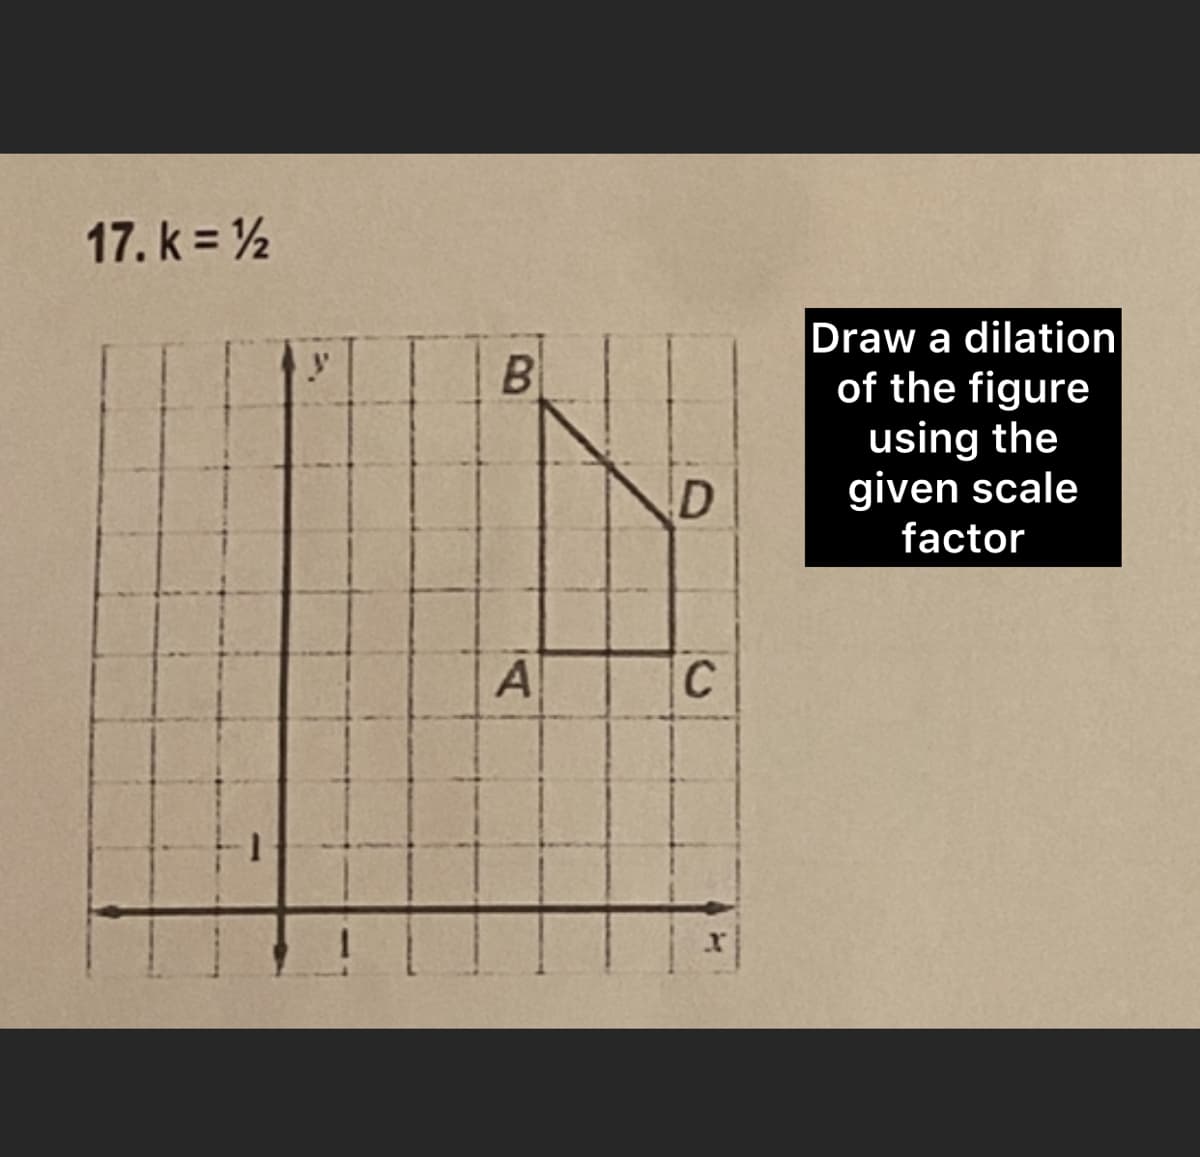 17. k = 1/2
B
D
A
C
Draw a dilation
of the figure
using the
given scale
factor